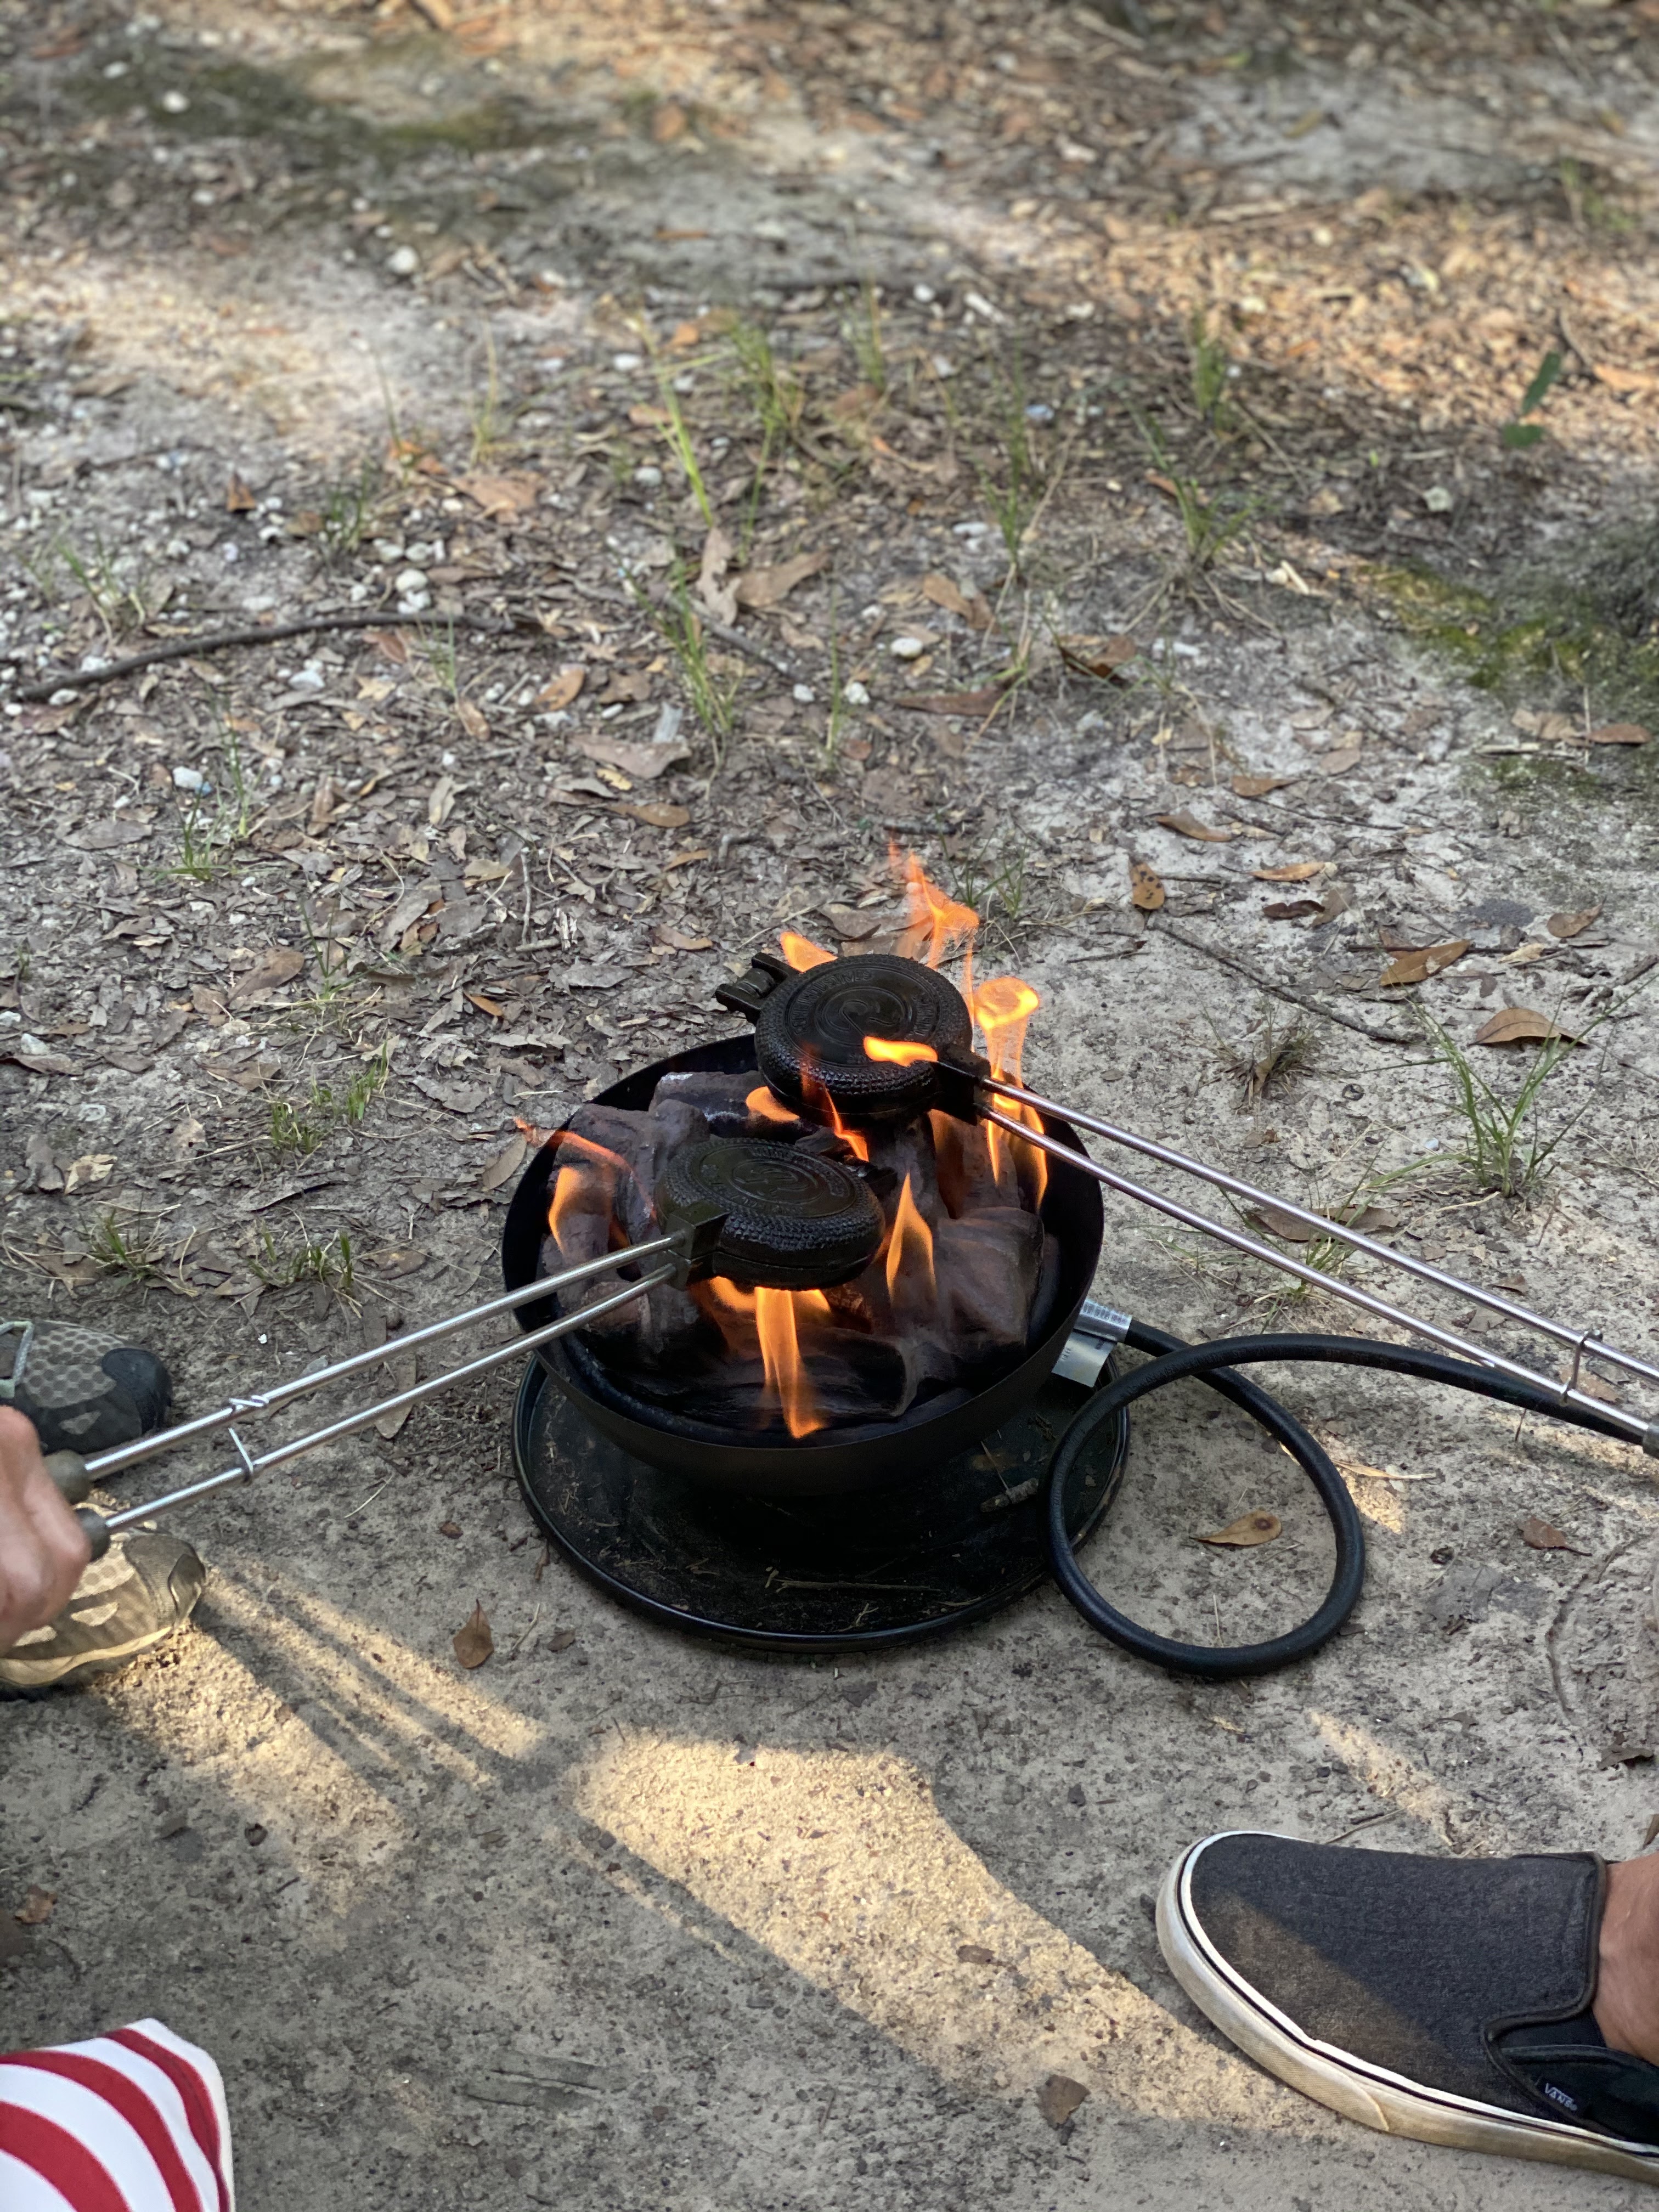 Pie Irons - Make A New Camping Tradition Around the Fire — The